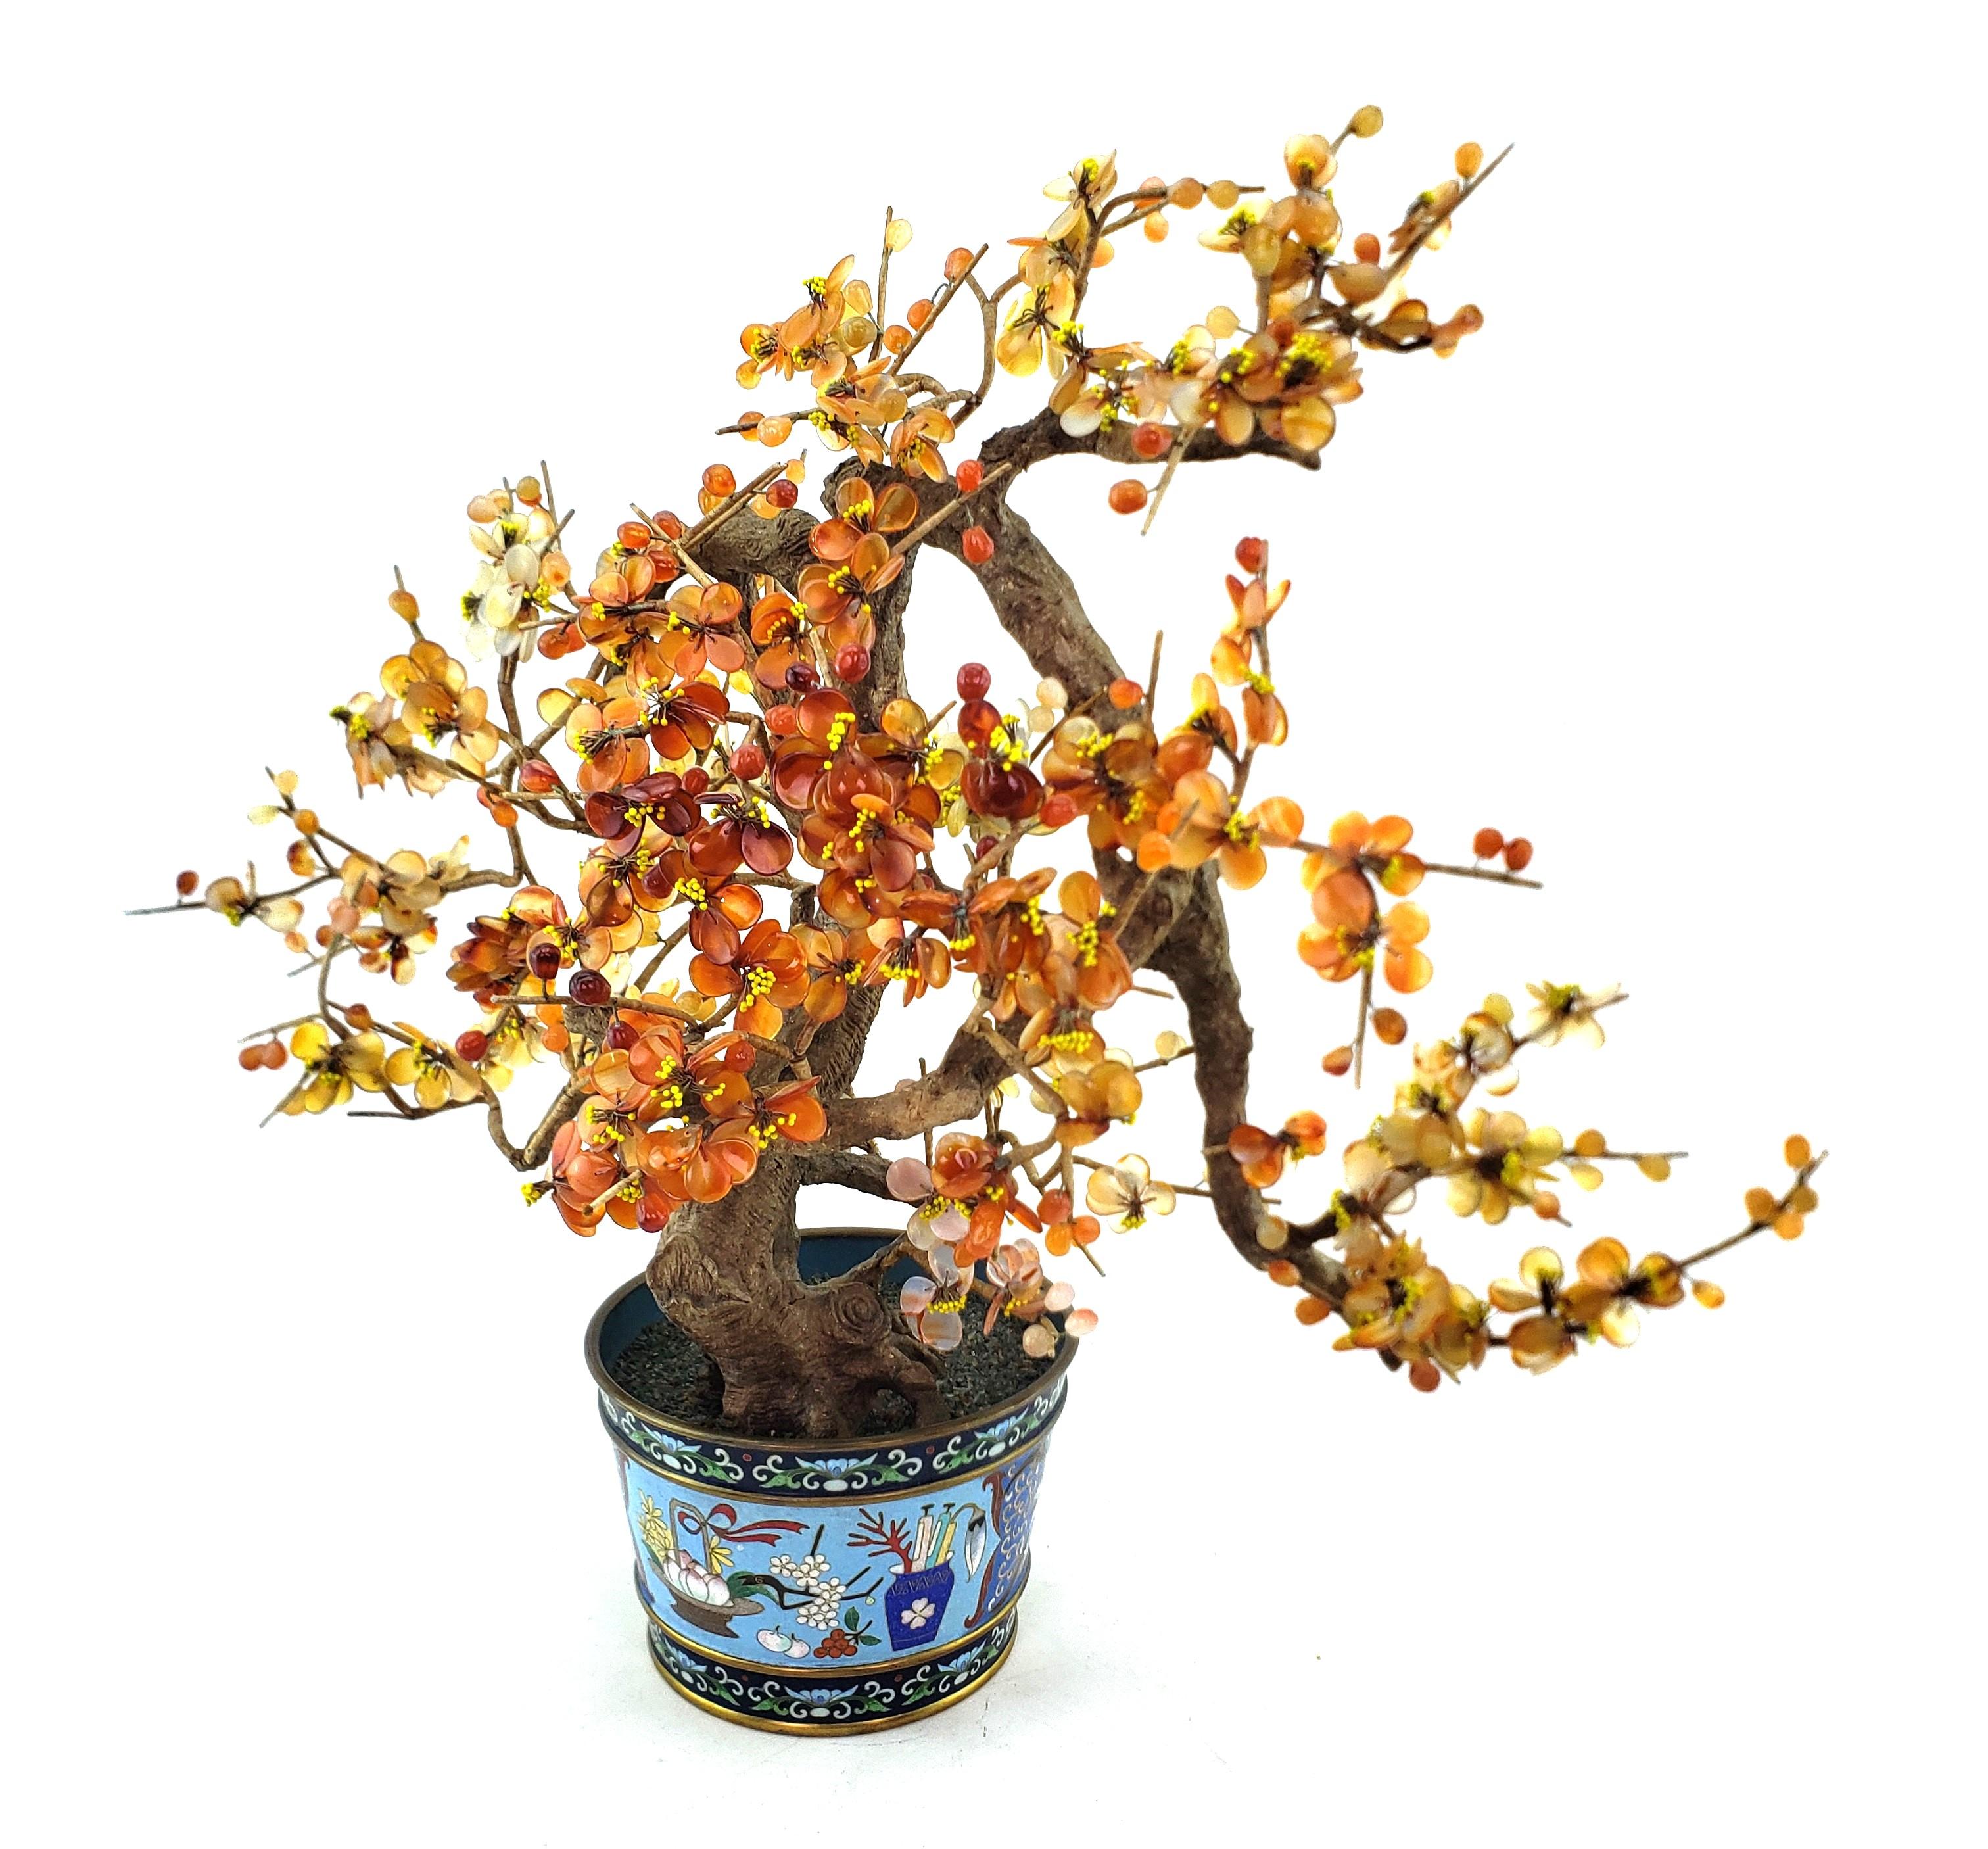 Hand-Crafted Antique Chinese Bonzai Styled Flowering Fruit Tree Sculpture with Cloisonne Pot For Sale